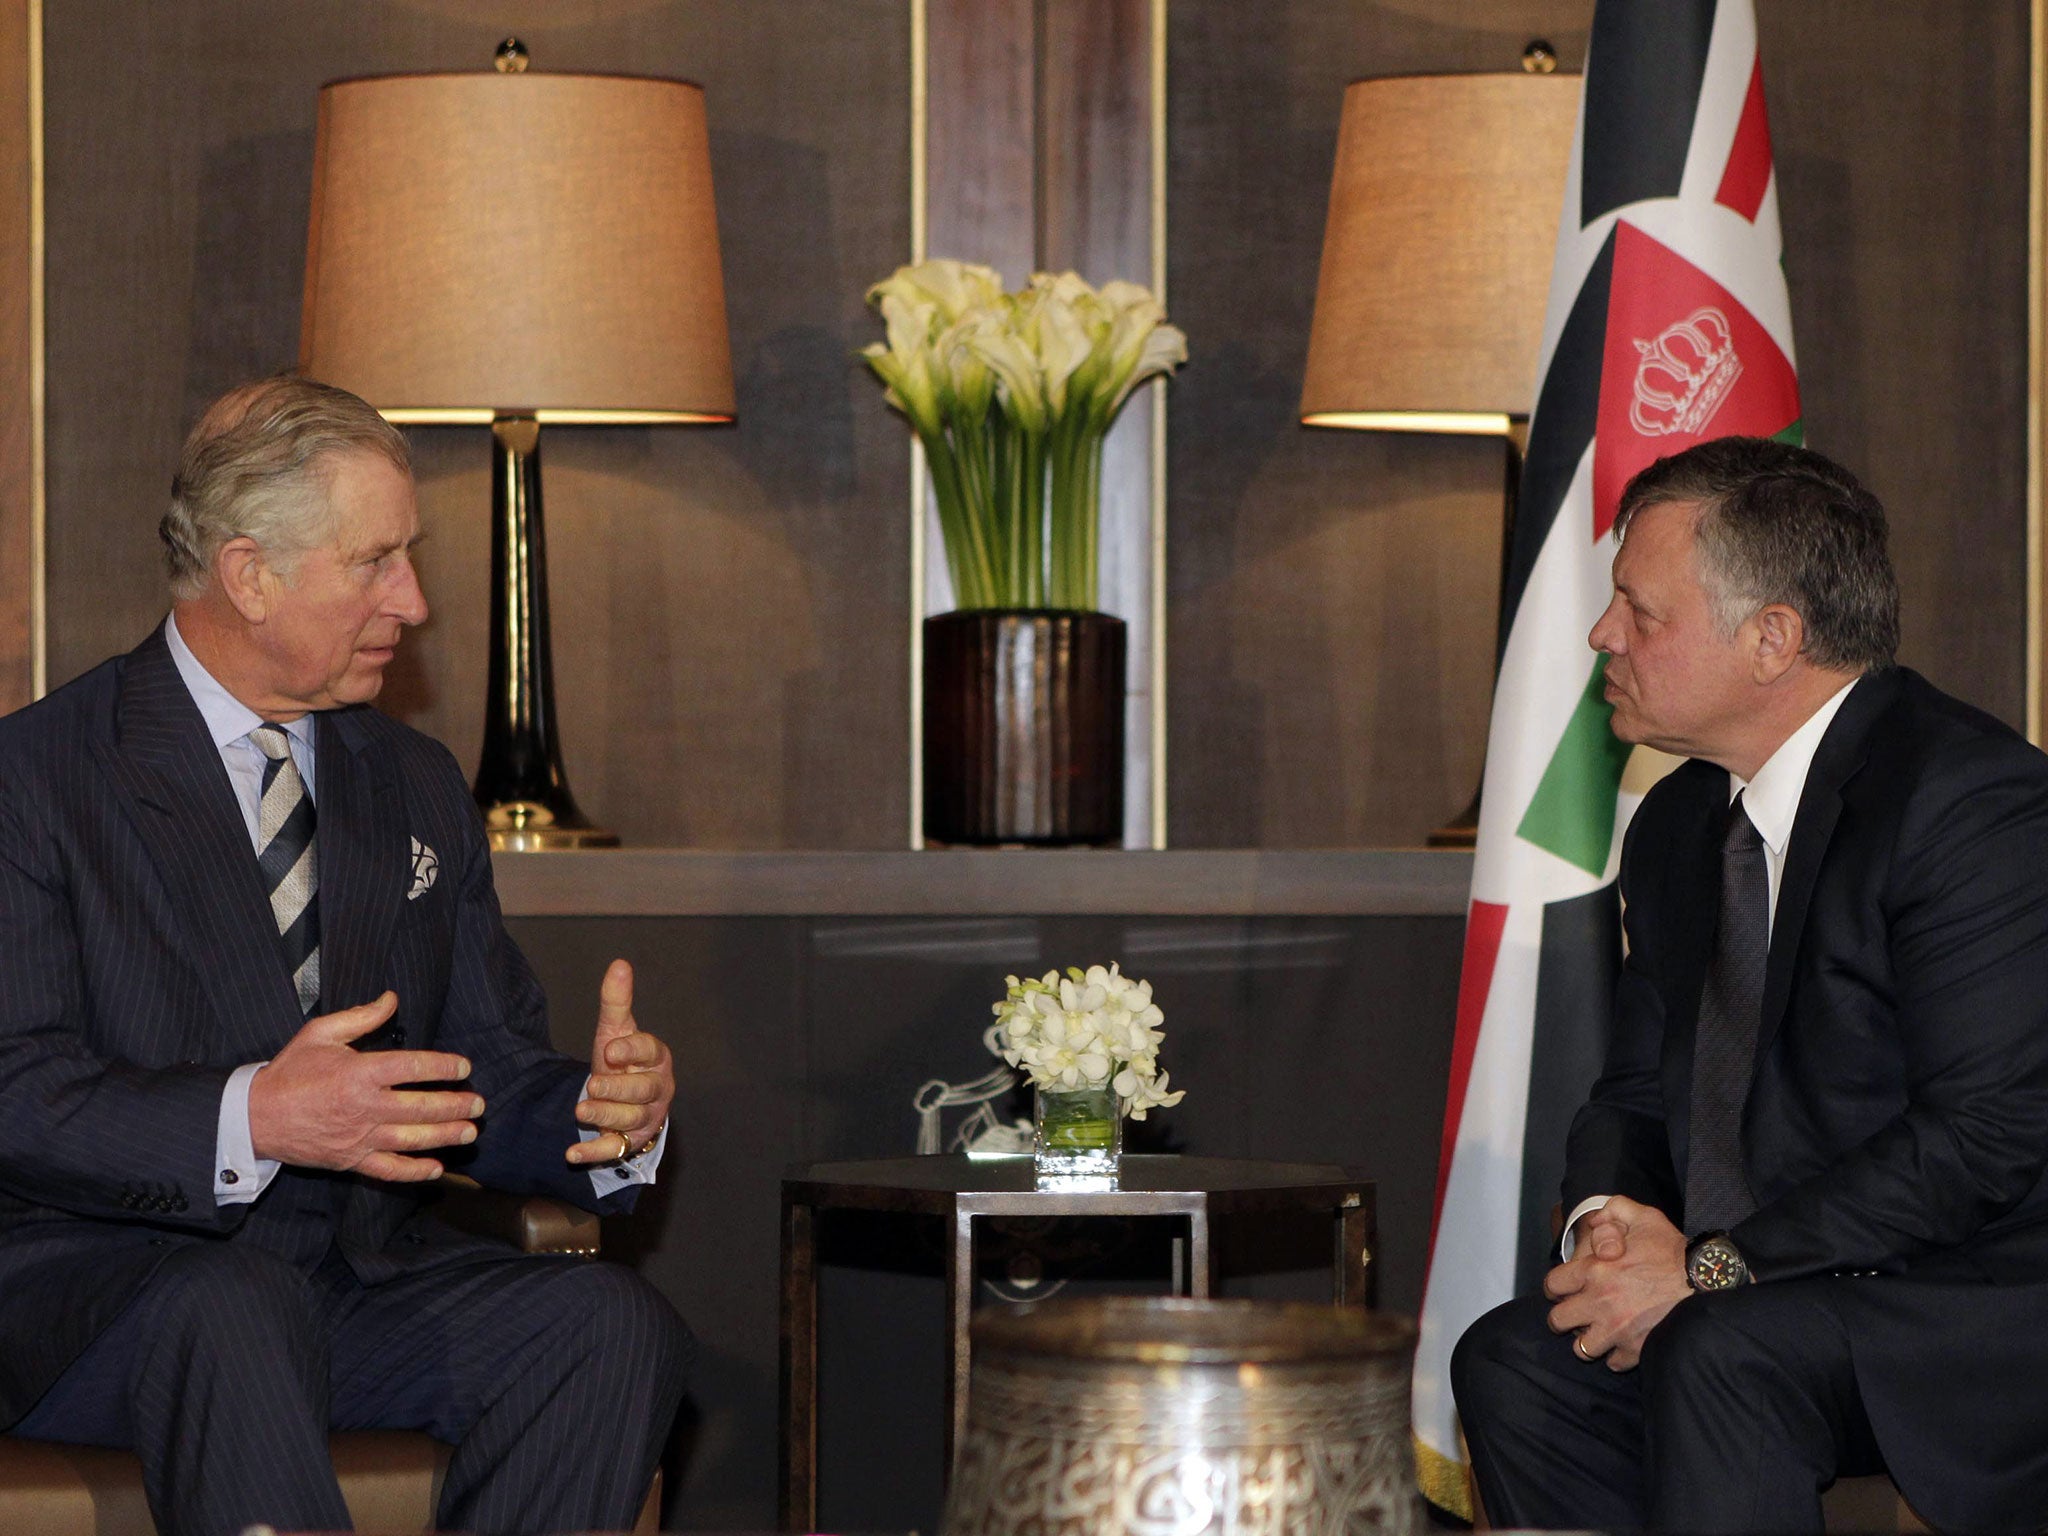 Prince Charles meets Jordan’s King Abdullah II in Amman on his six-day tour of the Middle East